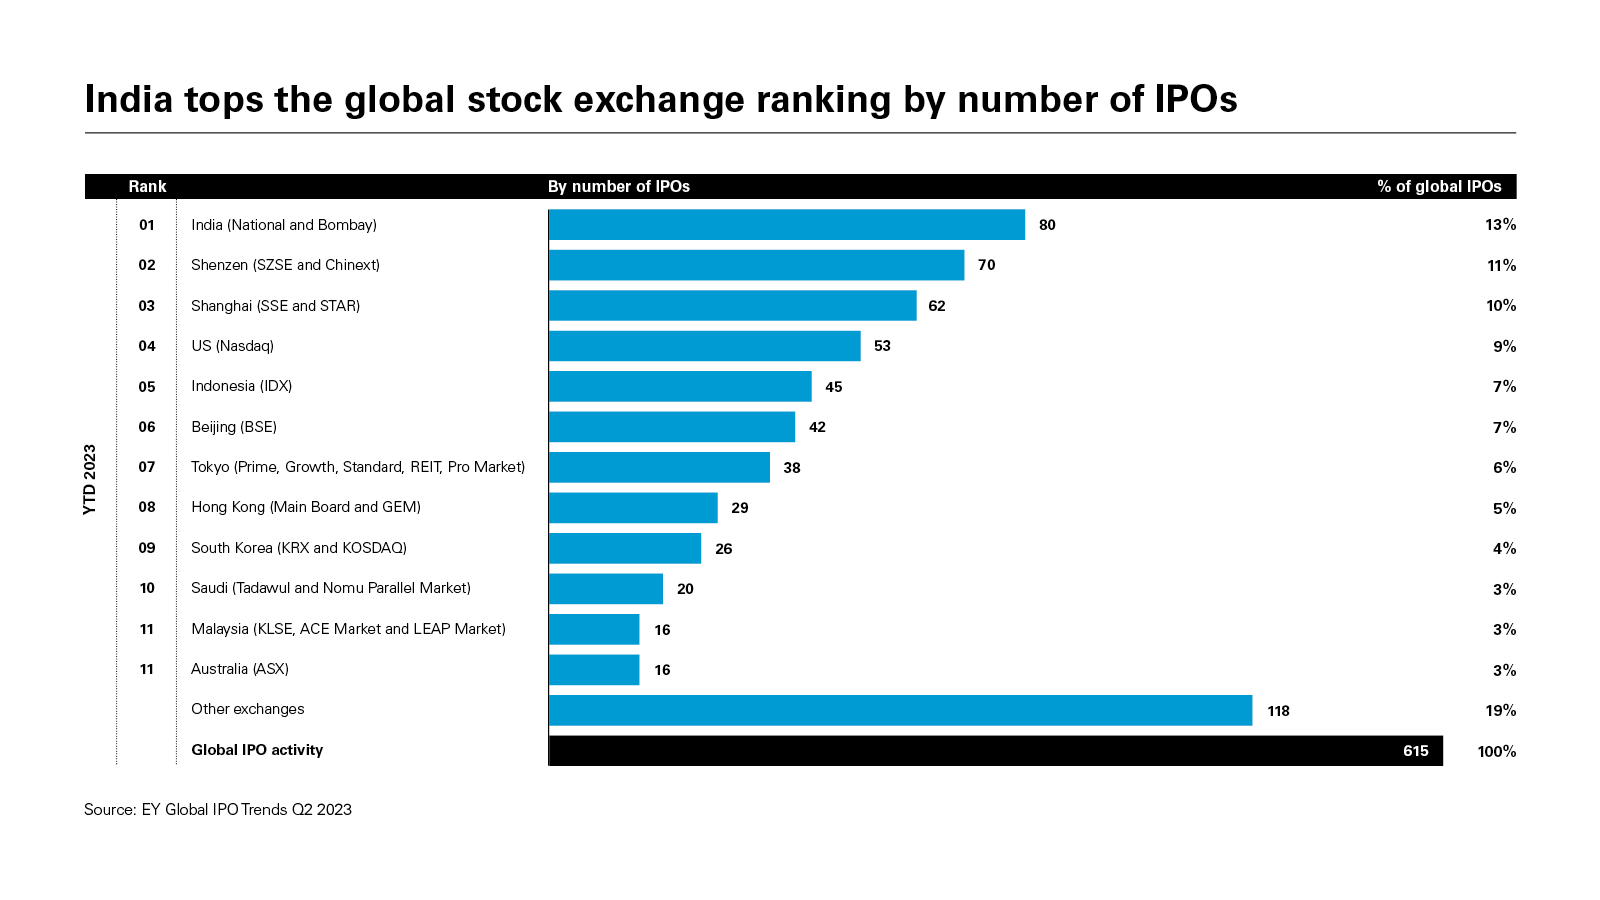 India tops the global stock exchange ranking by number of IPOs